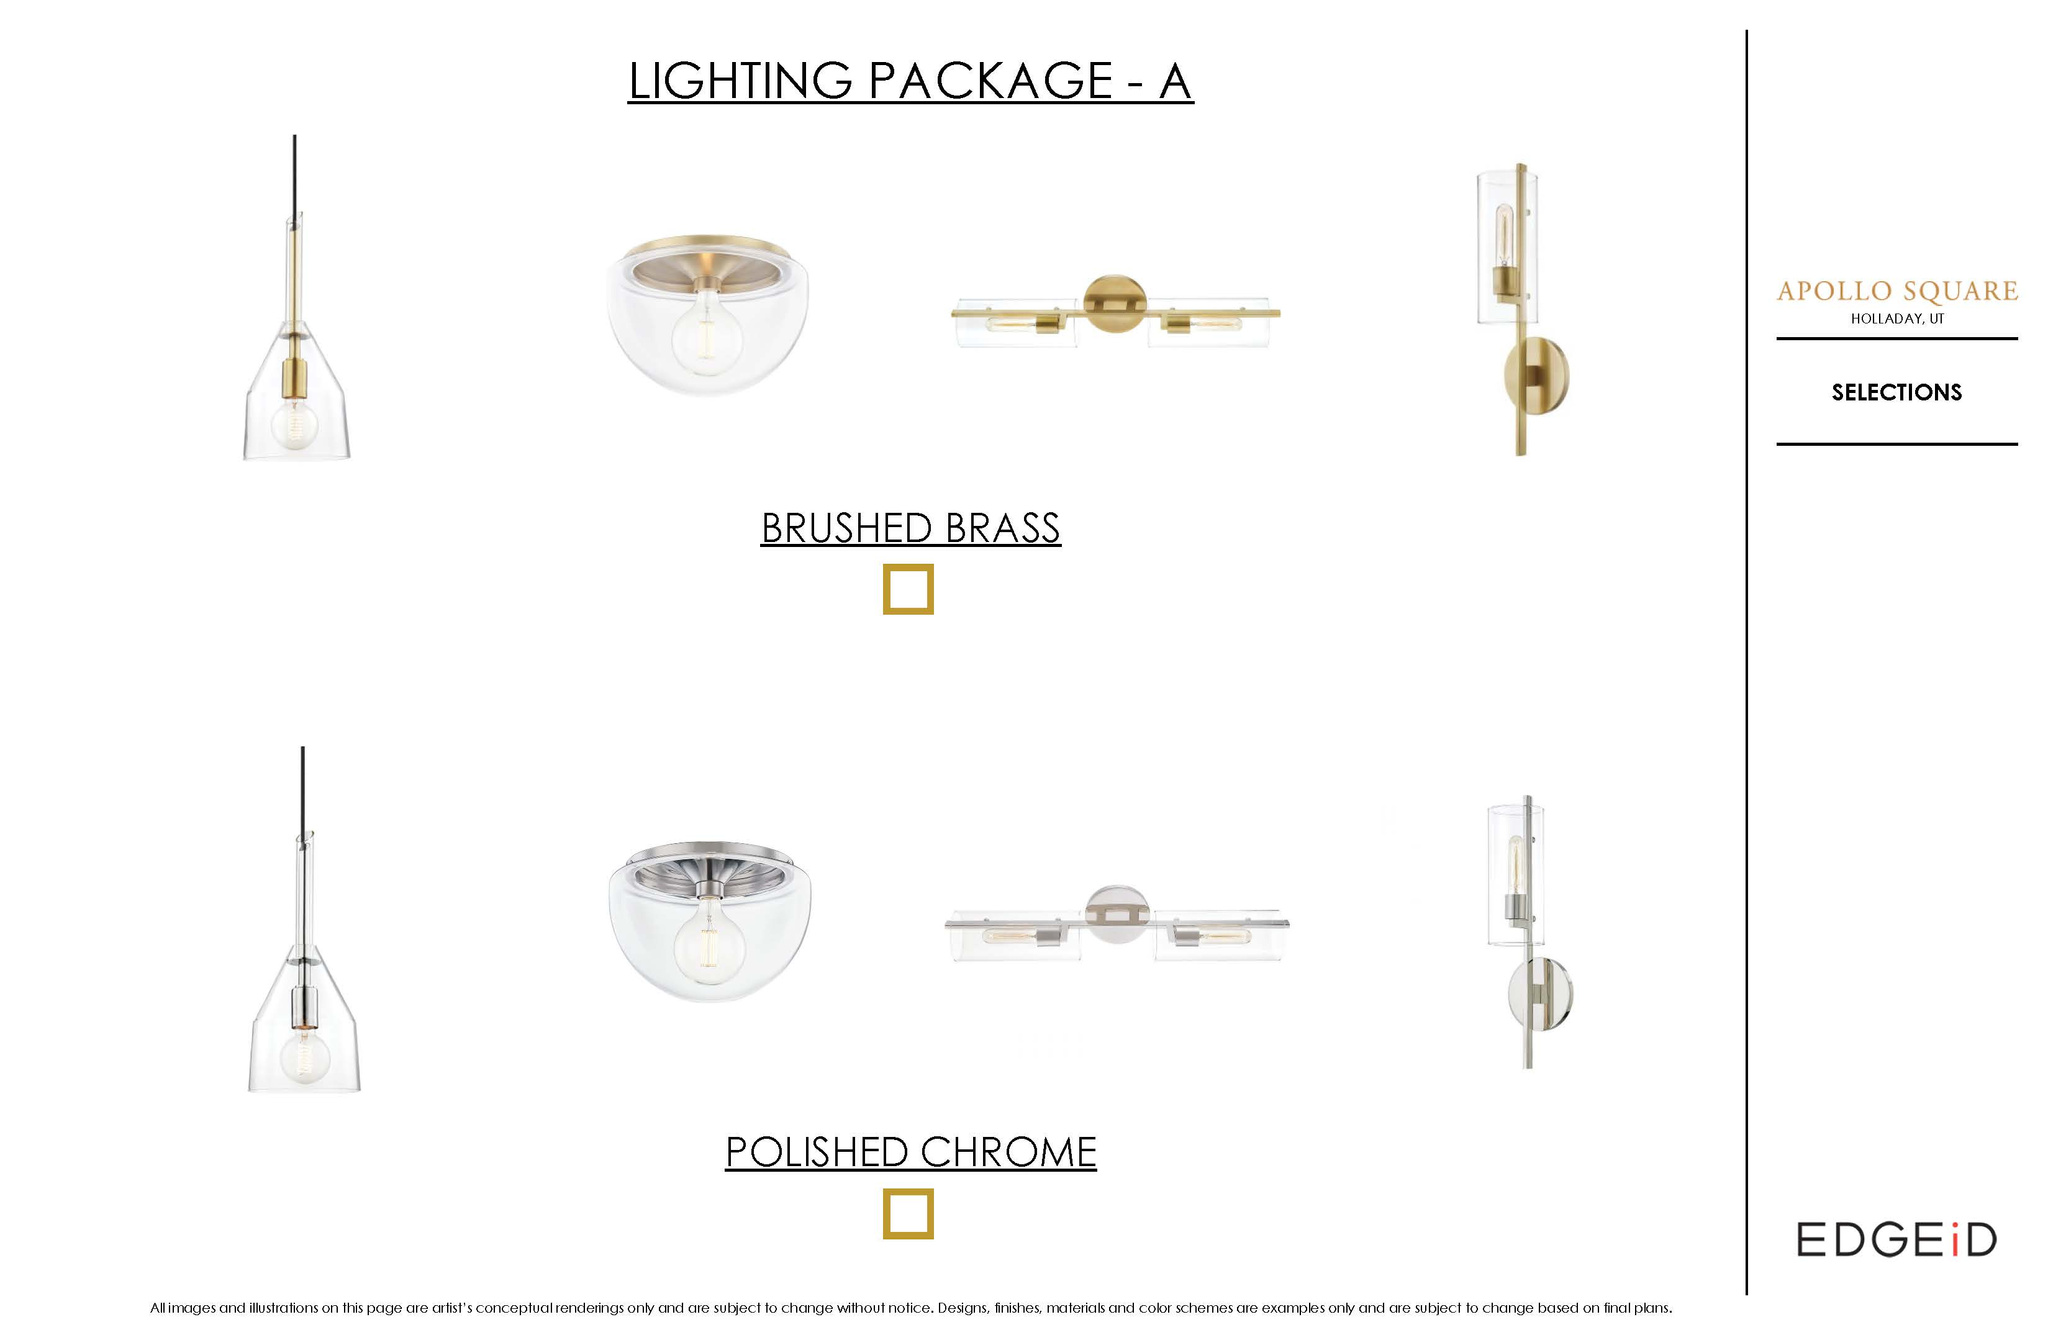 Lighting Package - A